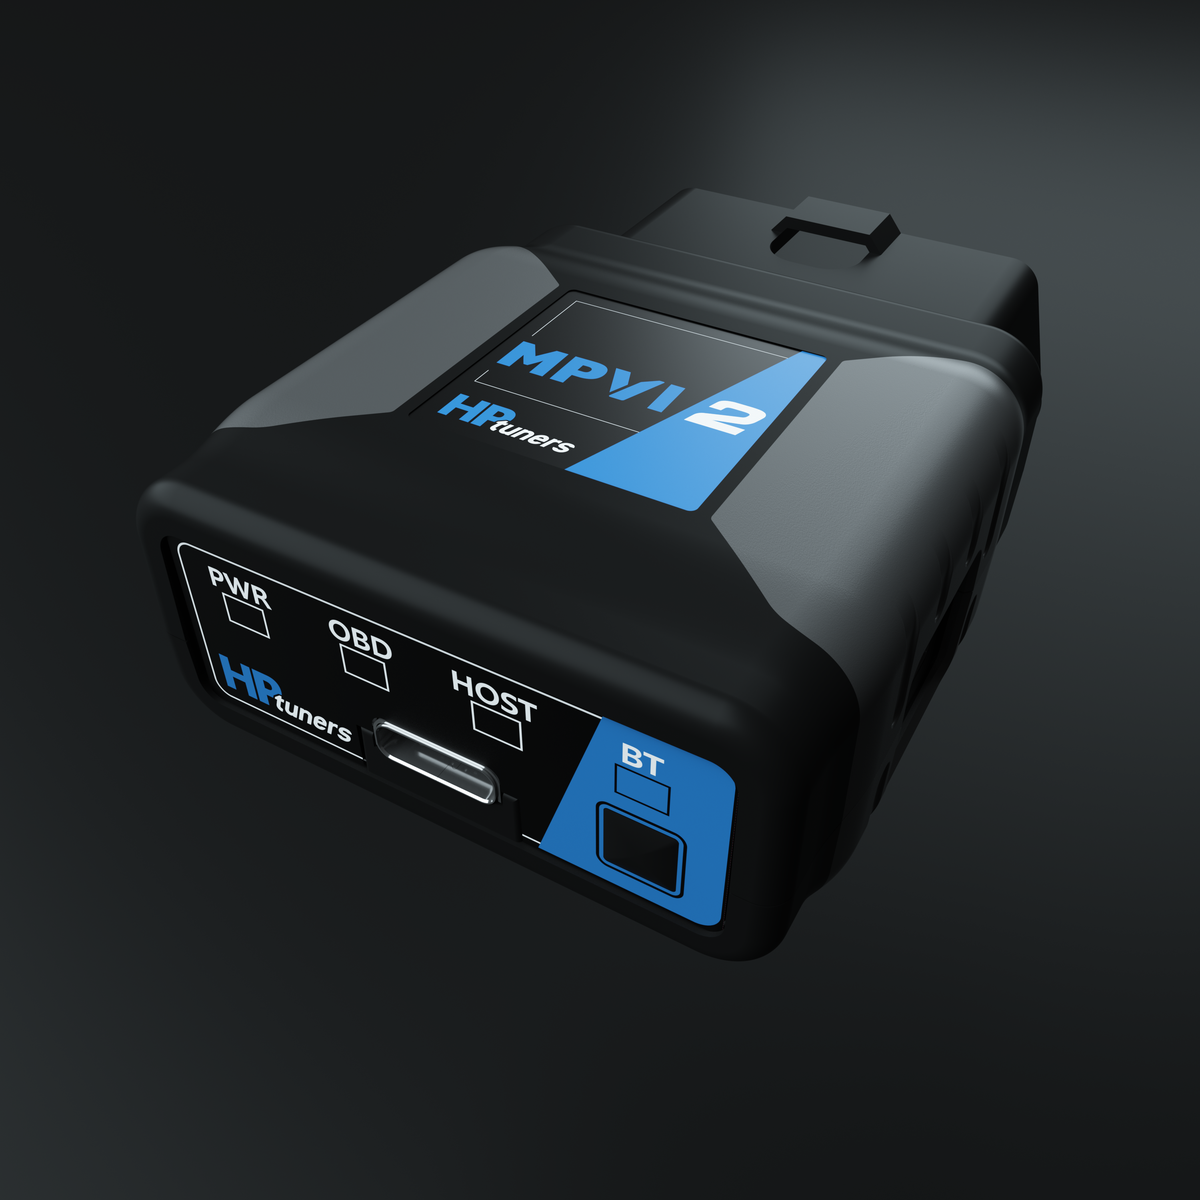 HP Tuners MPVI2, the latest generation of hardware from HP Tuners, Replaces VCM Suite